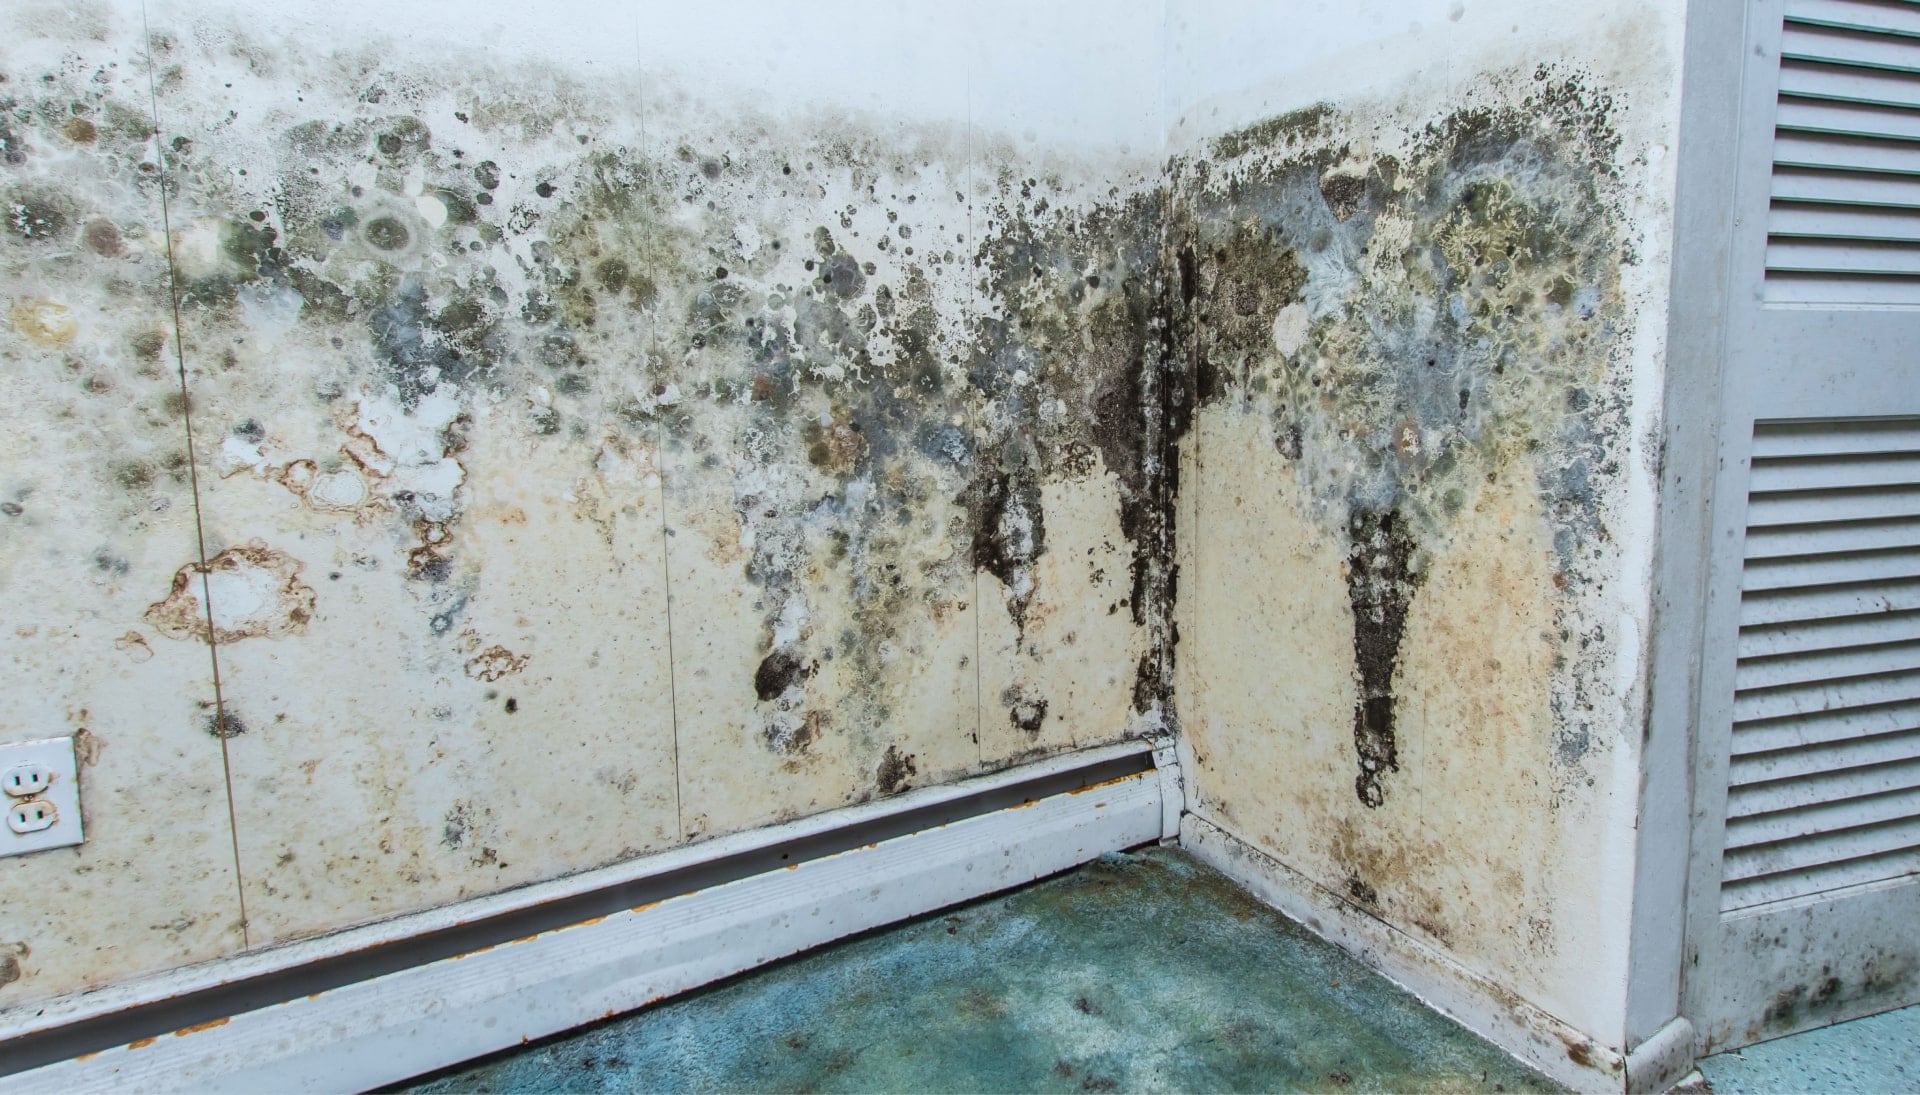 Professional mold removal, odor control, and water damage restoration service in Burbank, California.